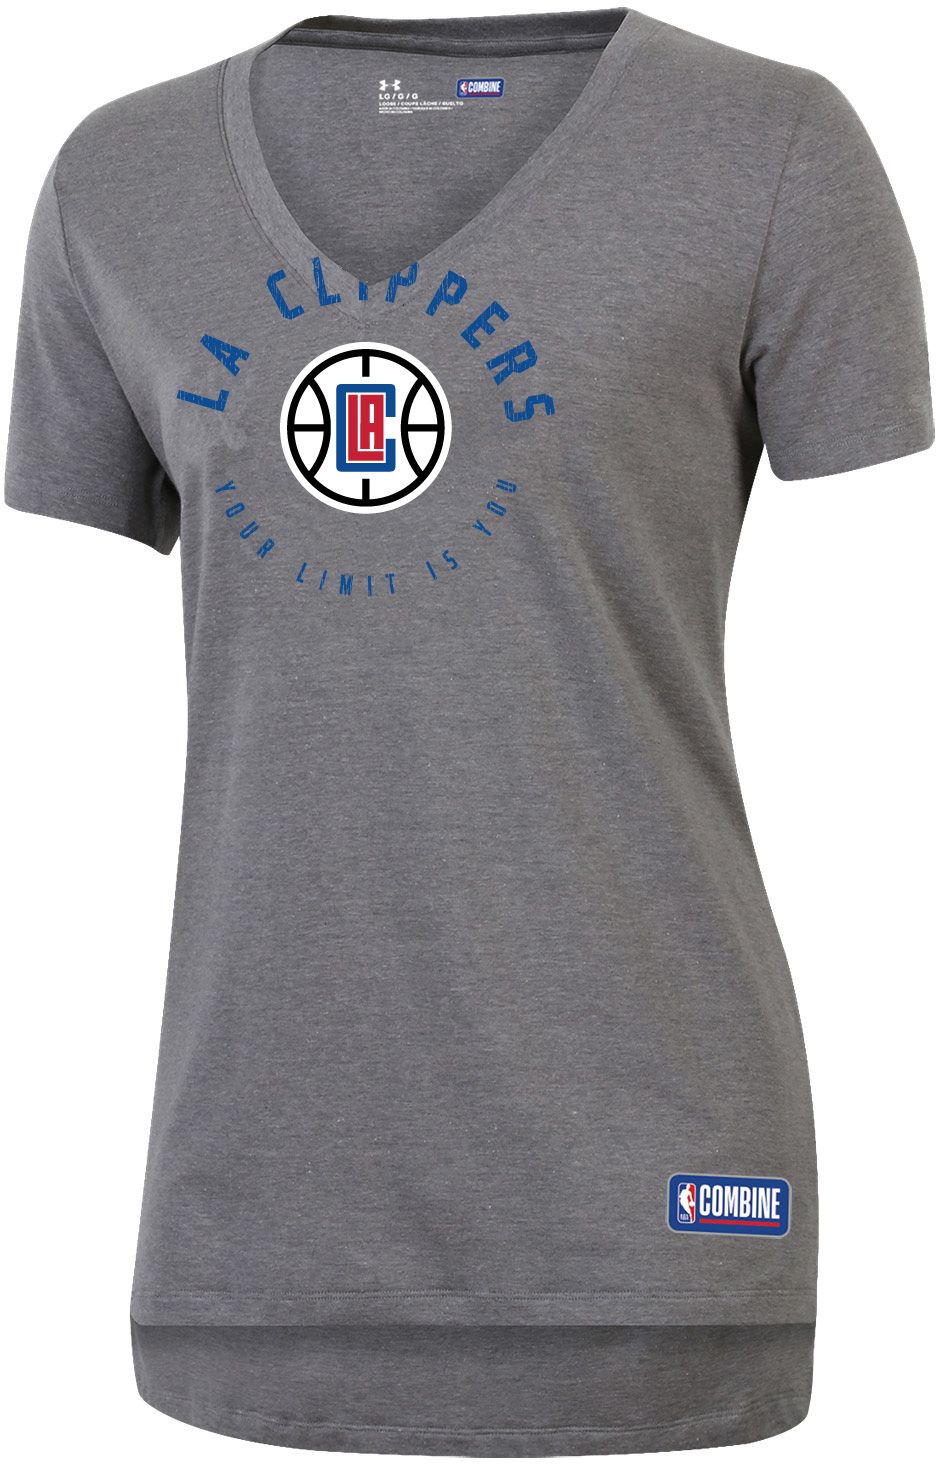 Los Angeles Clippers Women's Apparel 